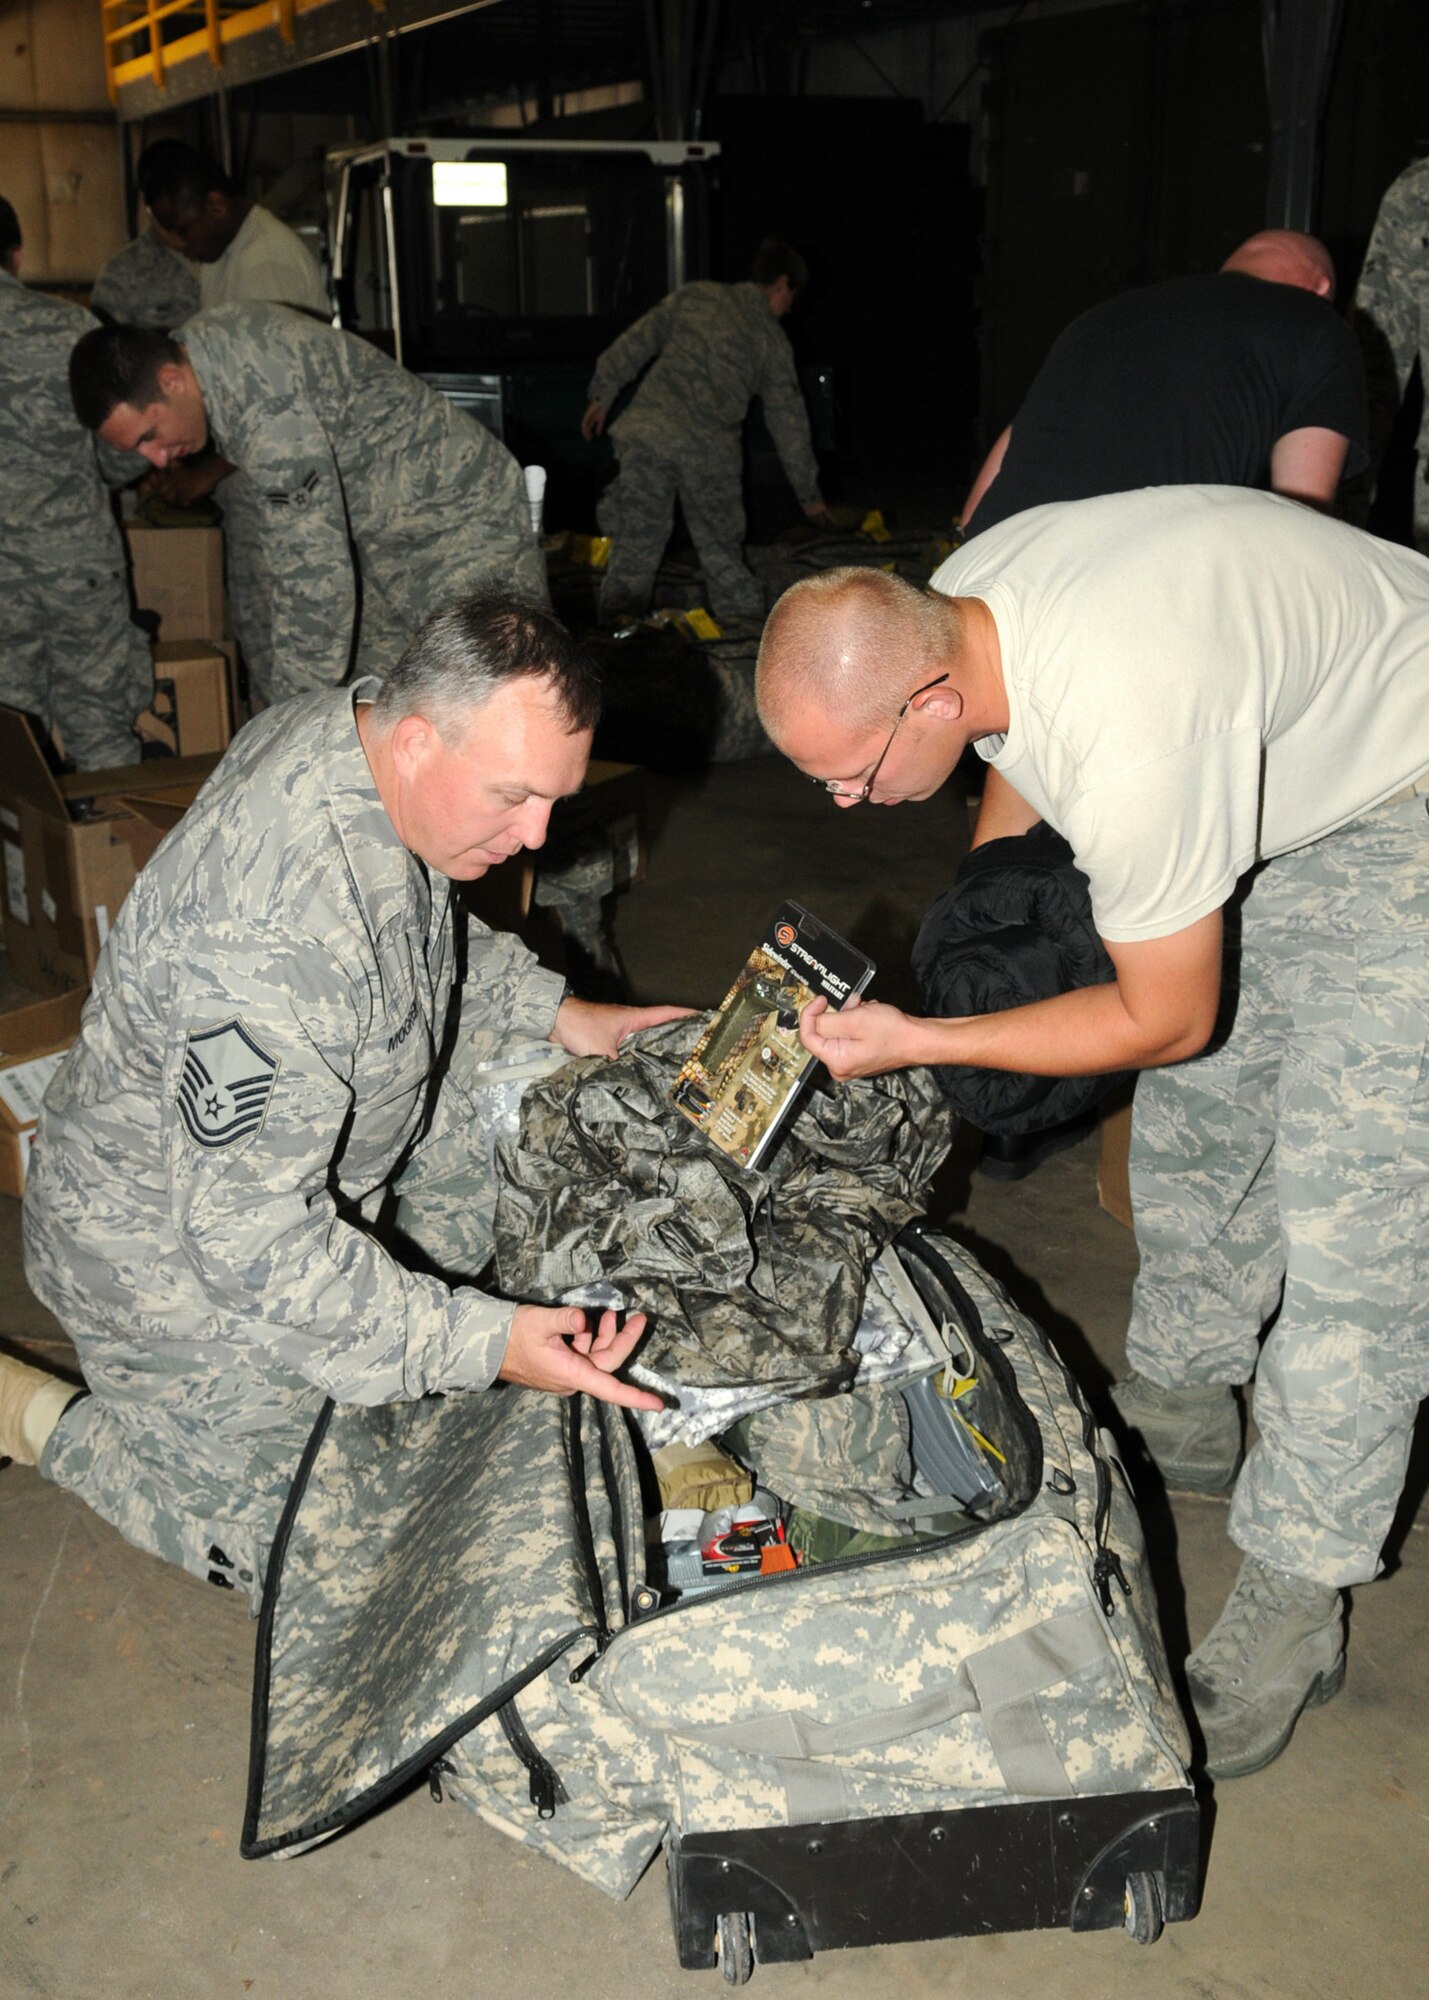 Master Sgt. James Mogren assists a defender, who is about to deploy, with verifying the required items are in his issued mobility bag. (Courtesy photo)